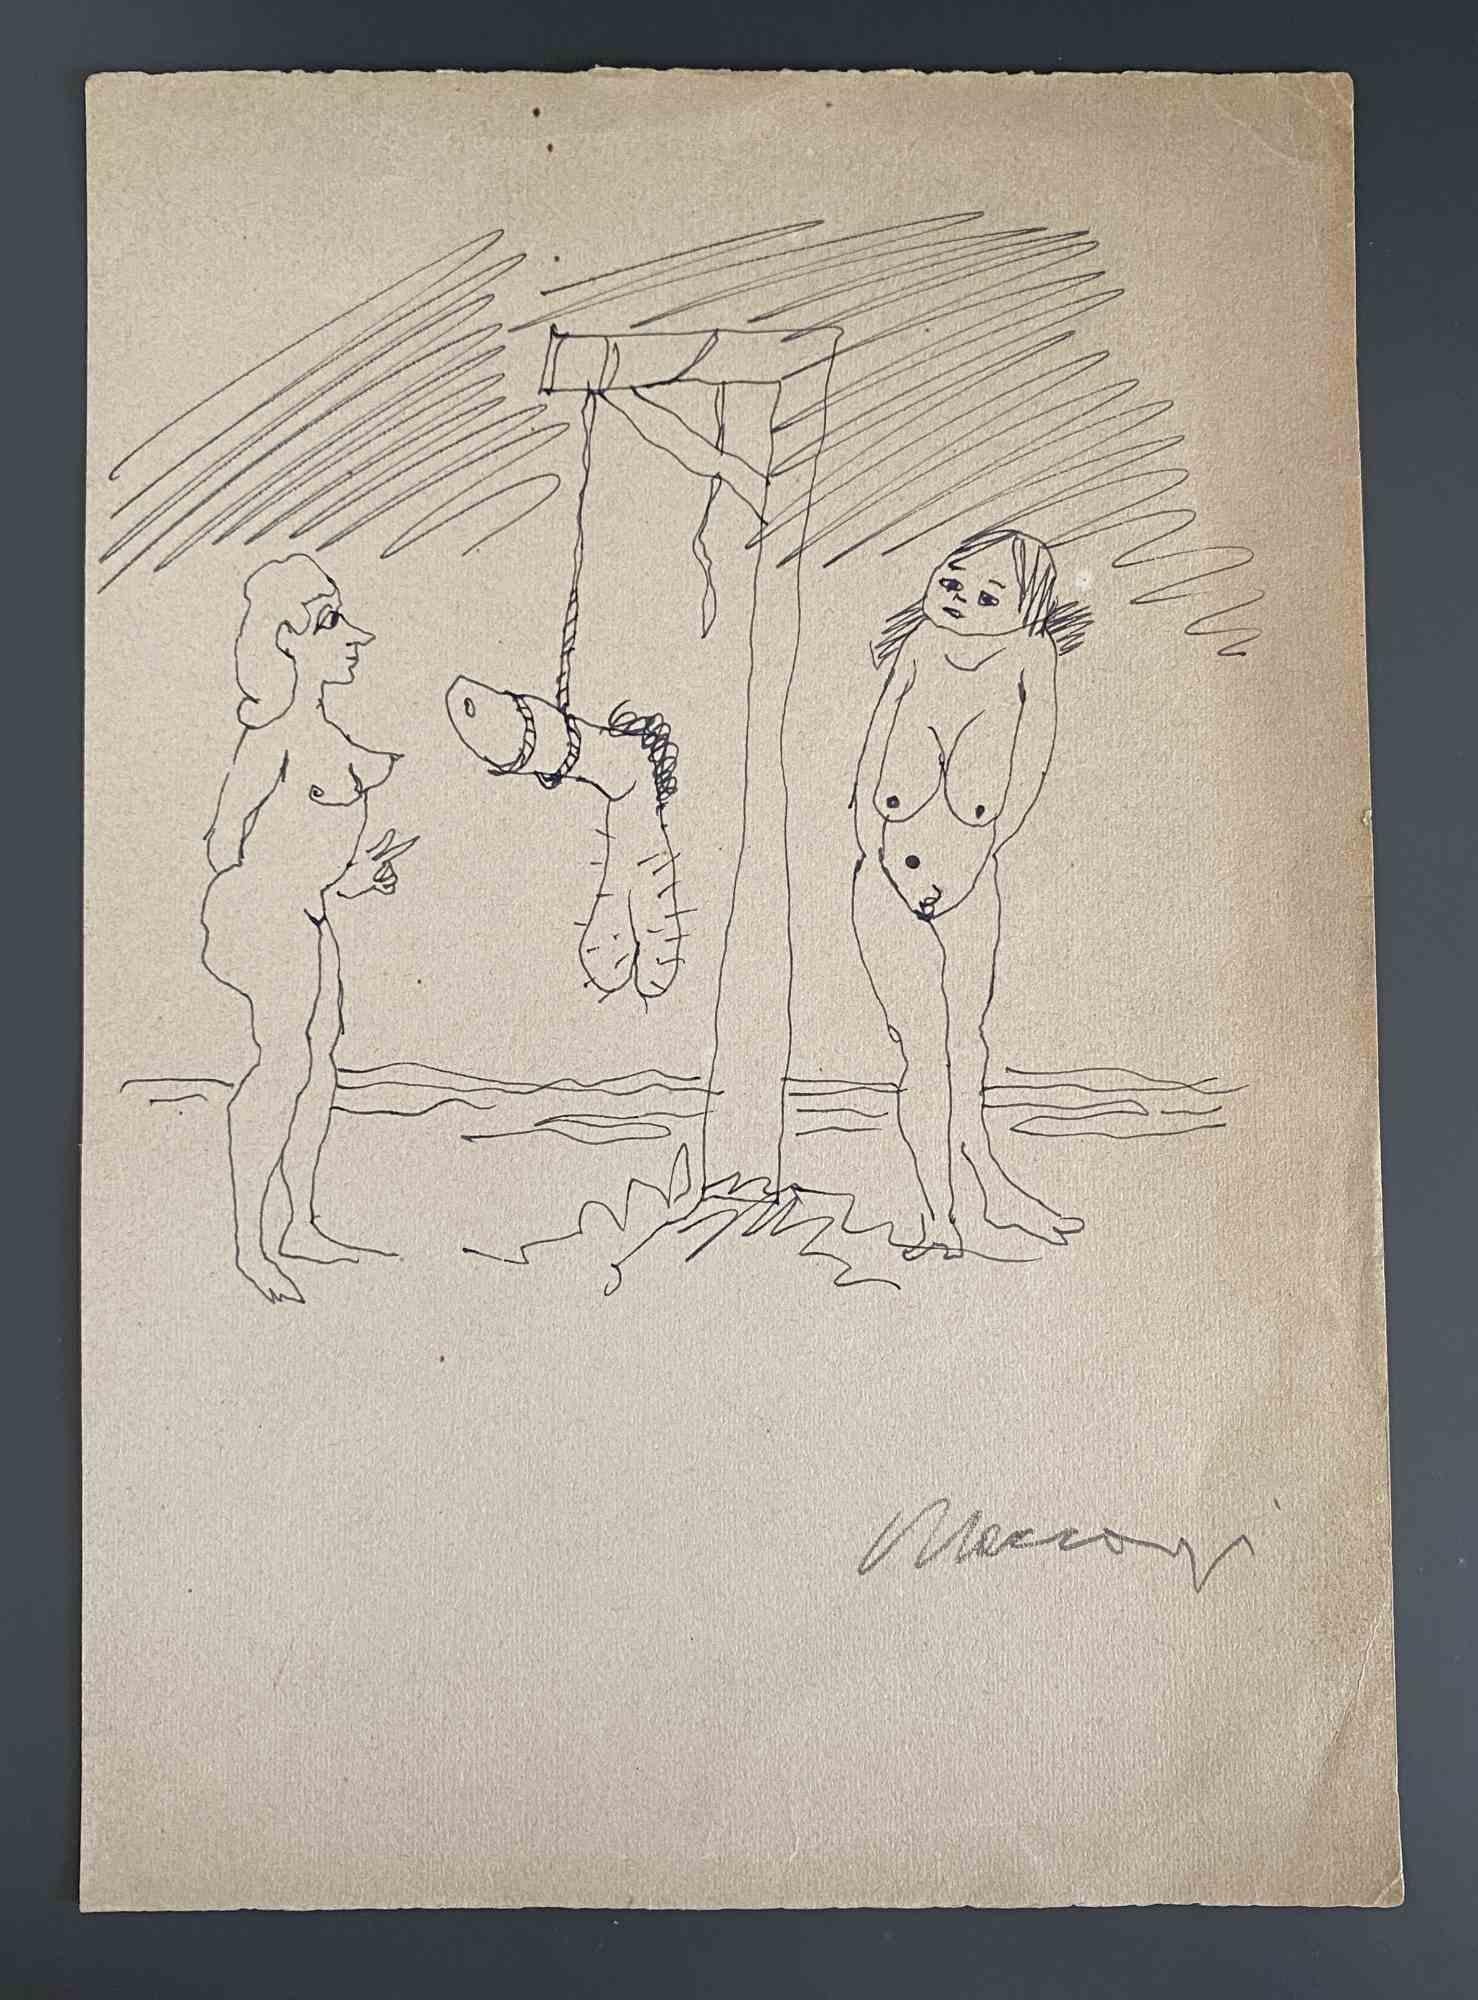 Hanged is a china ink Drawing realized by Mino Maccari  (1924-1989) in the Mid-20th Century.

Hand-signed on the lower.

Good conditions.

Mino Maccari (Siena, 1924-Rome, June 16, 1989) was an Italian writer, painter, engraver and journalist, winner